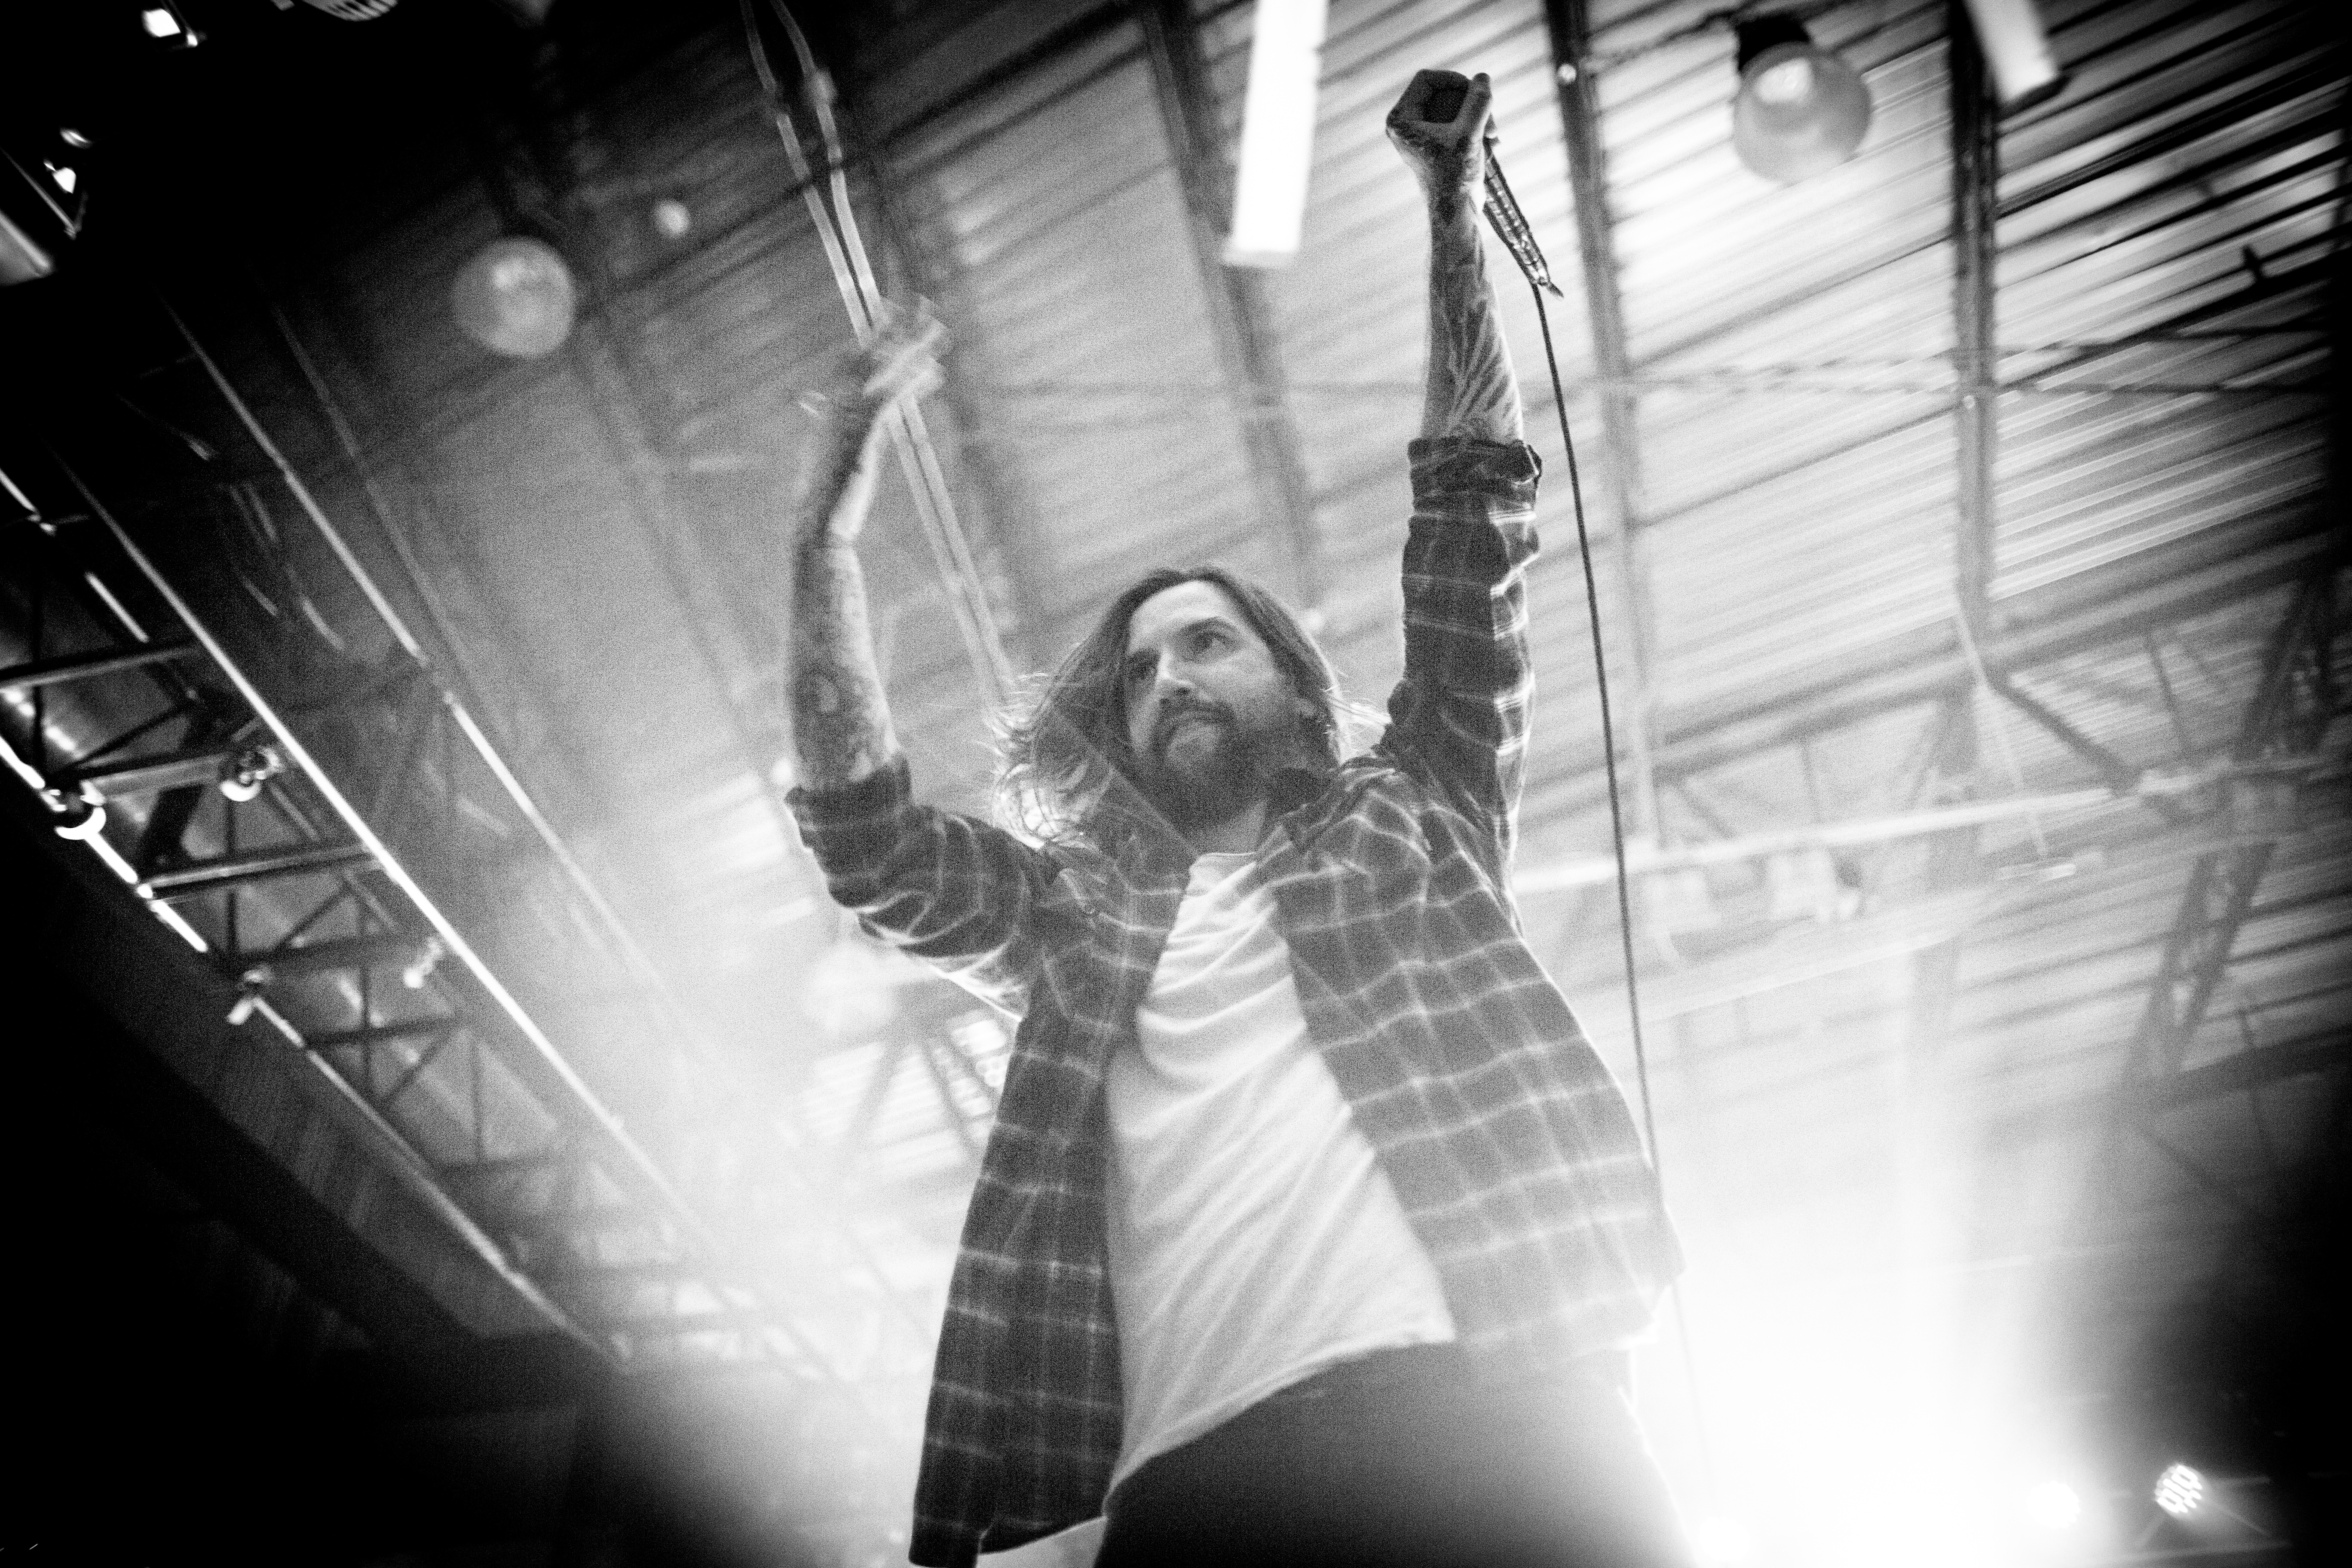 Every Time I Die’s Annual Christmas Show at Riverworks (12/16/17)